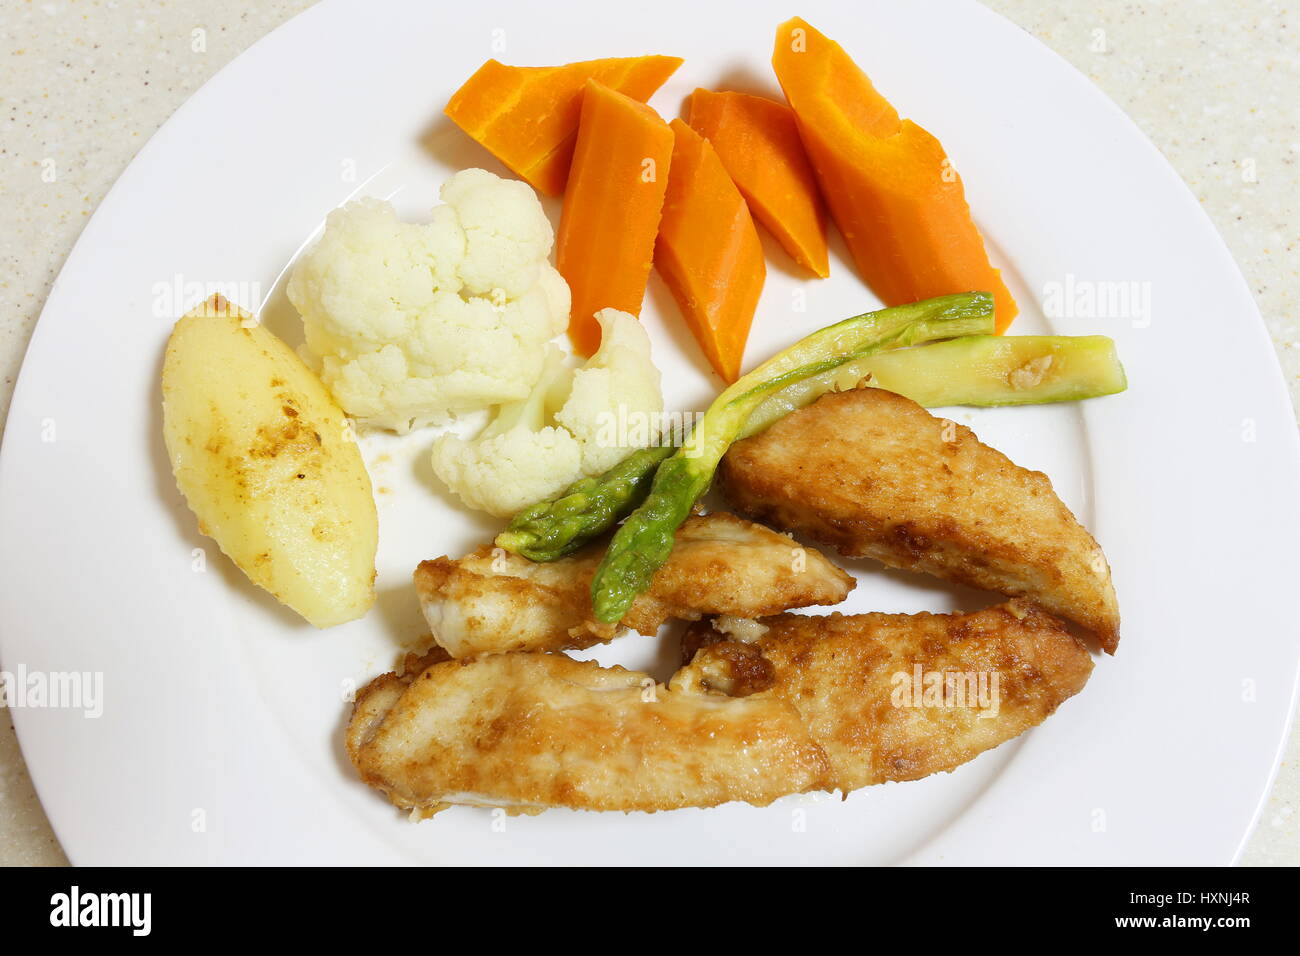 Pan fried chicken breast, coated with seasoned flour and served with asparagus and steamed vegetables Stock Photo